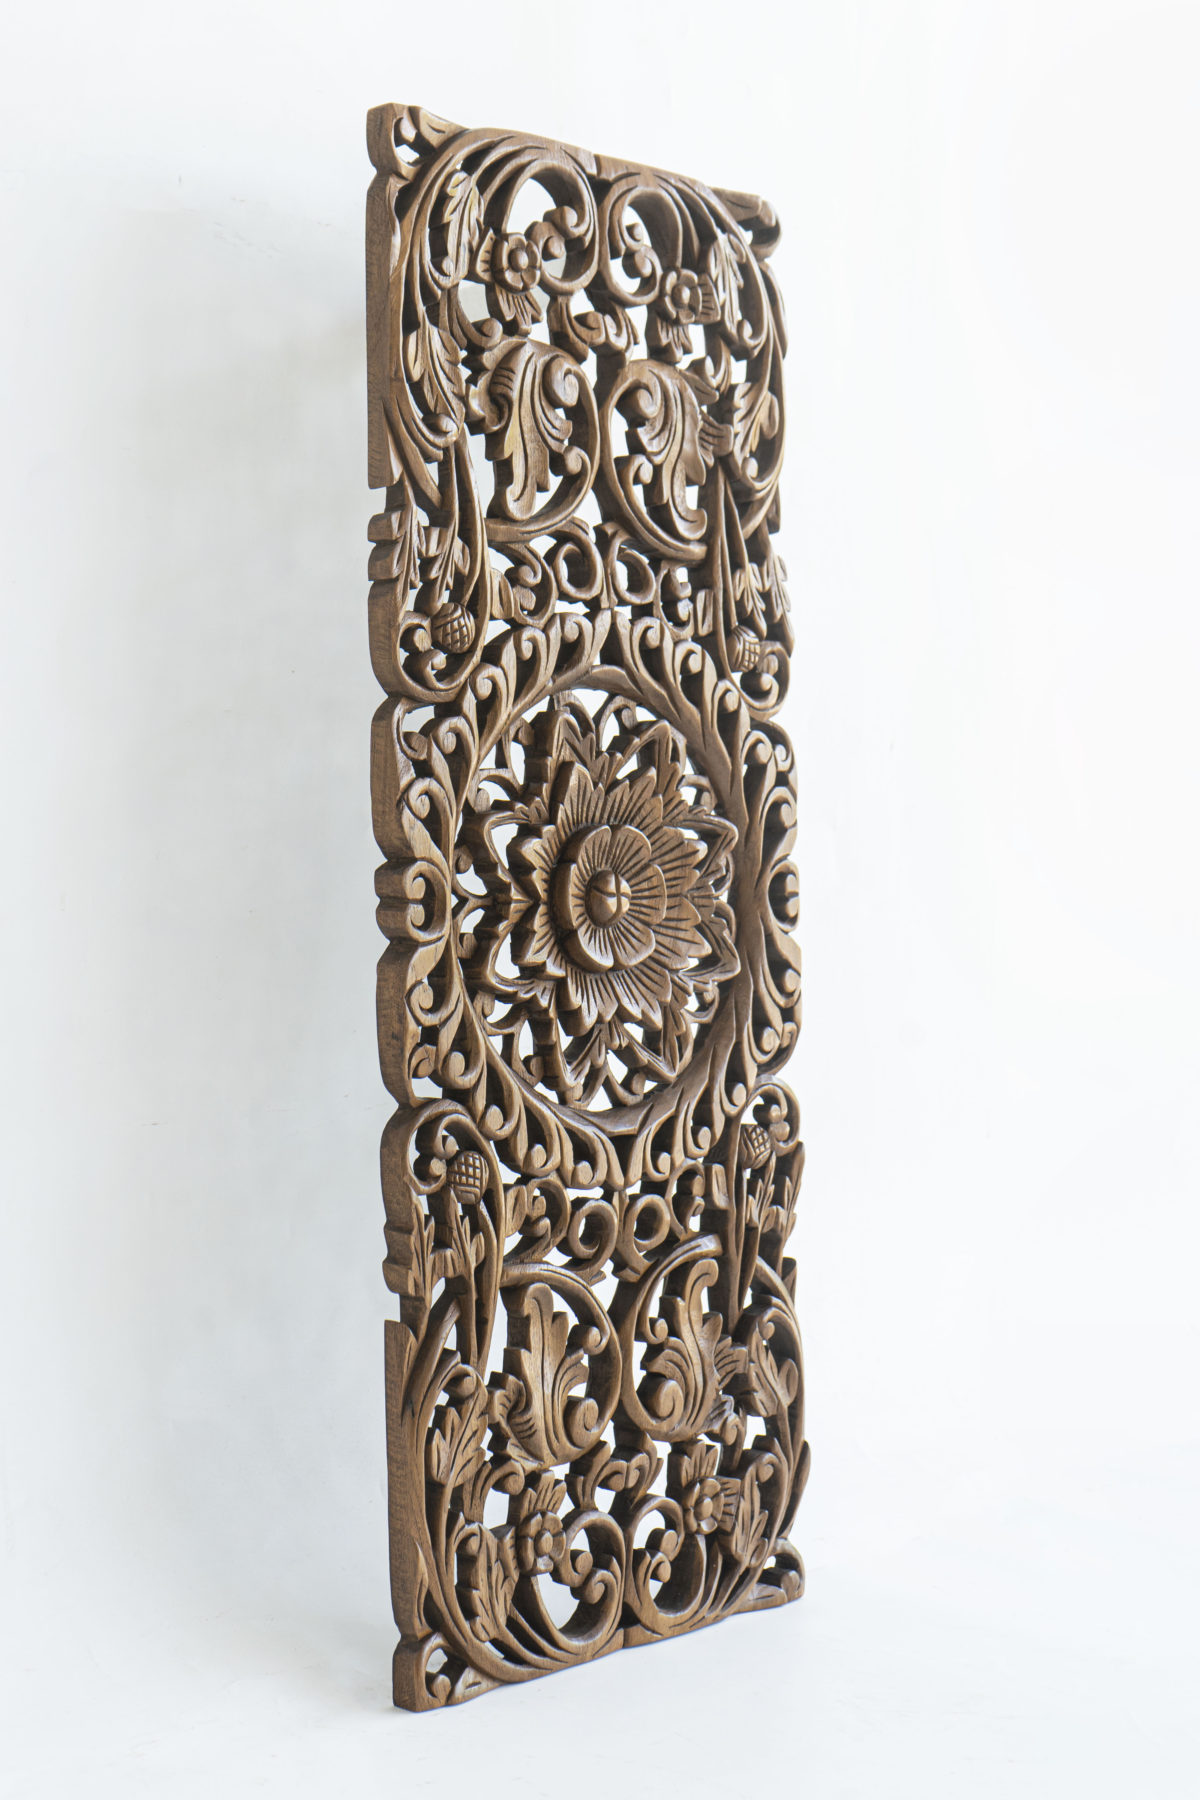 Solid wood reclaimed carving